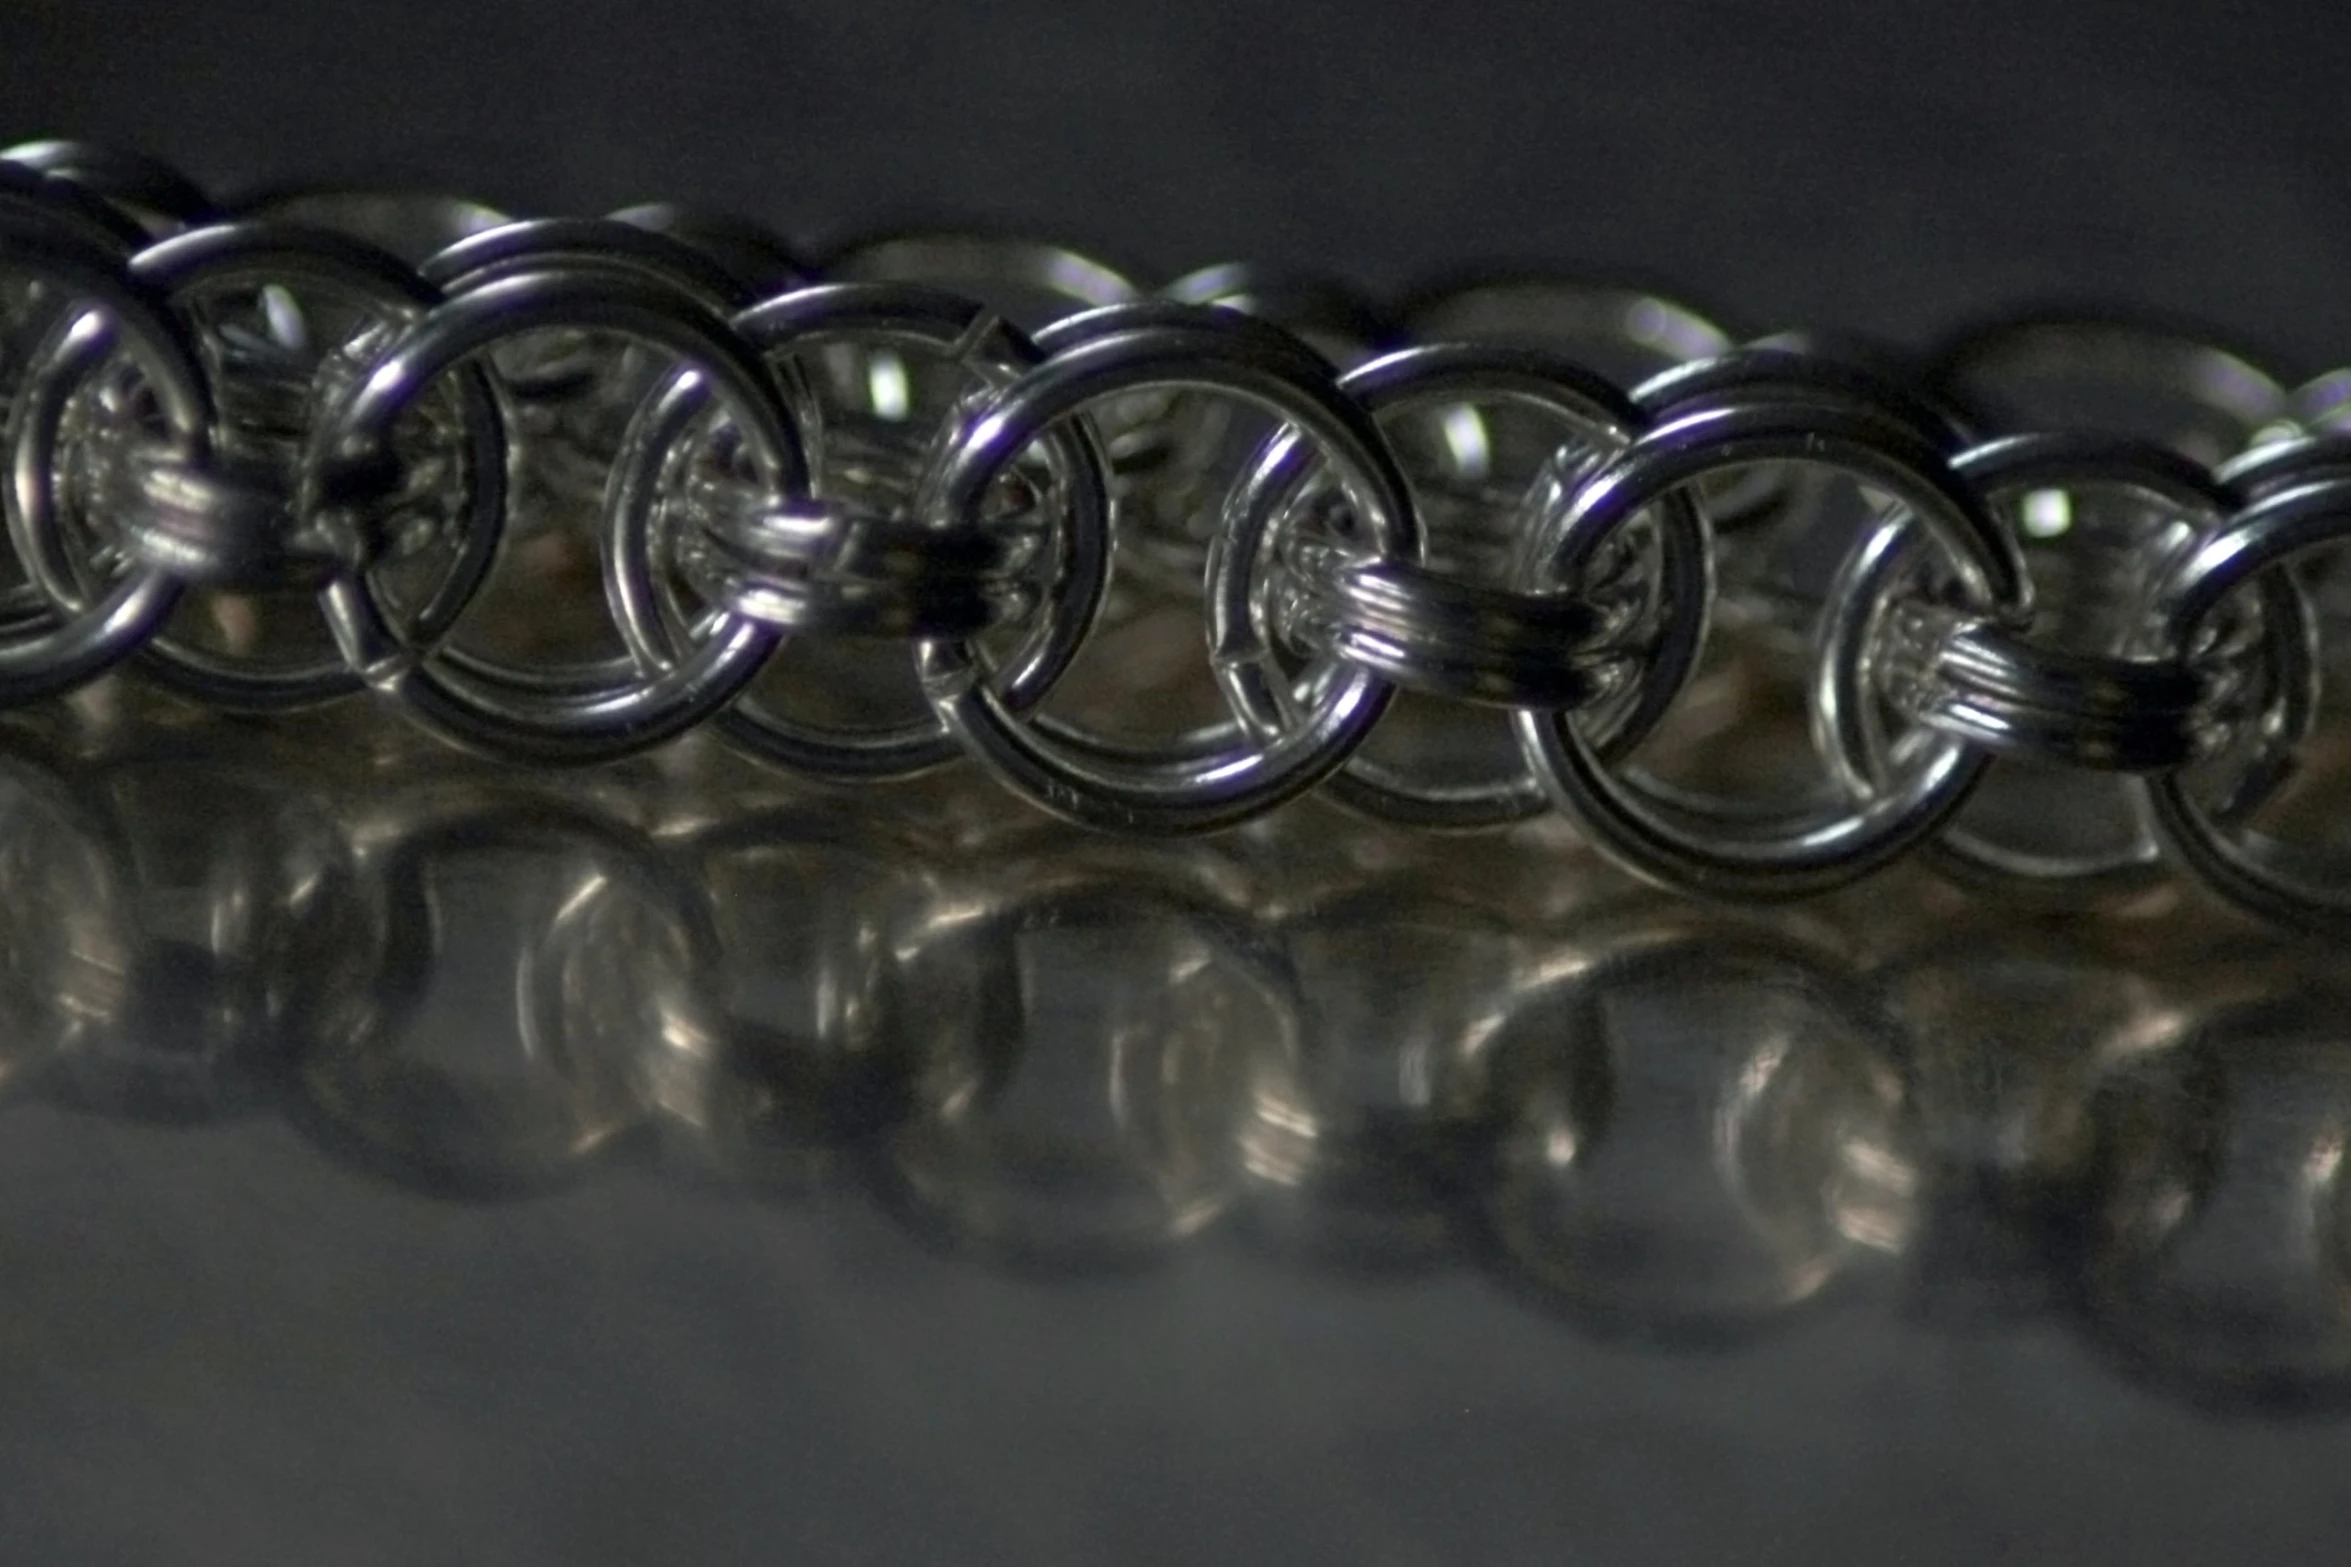 a chain with an o - ring on top